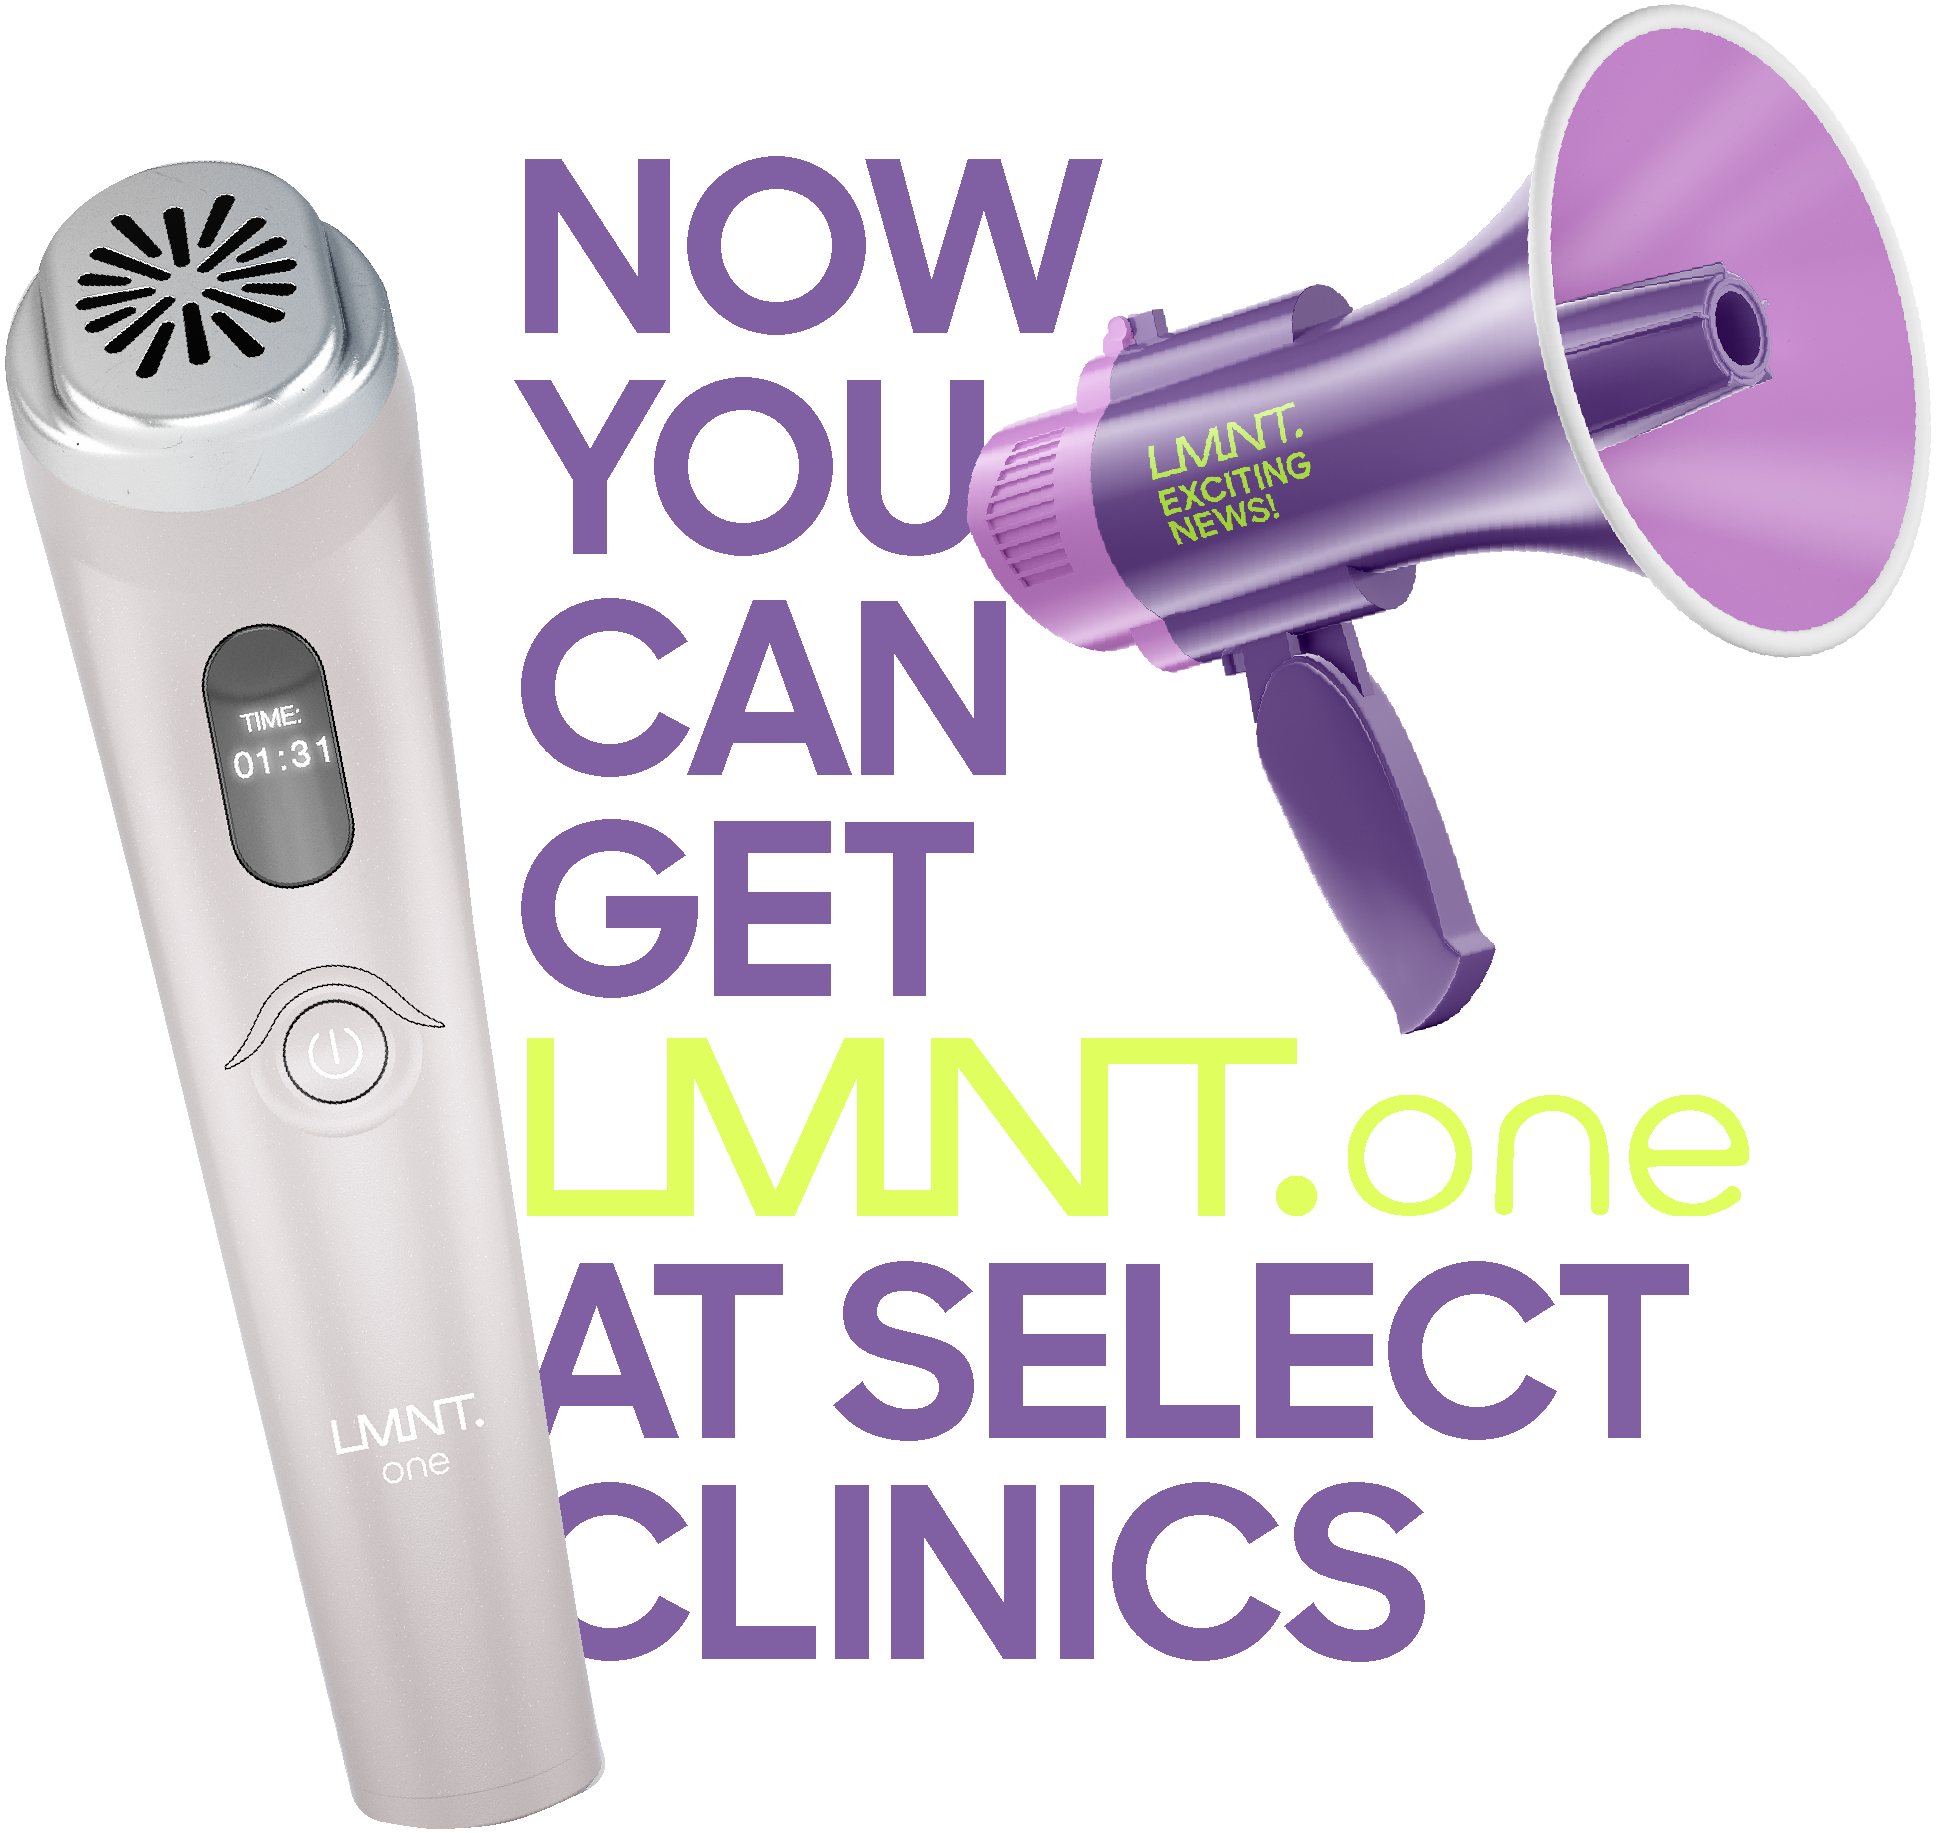 Now you can get LMNT.one at select clinics